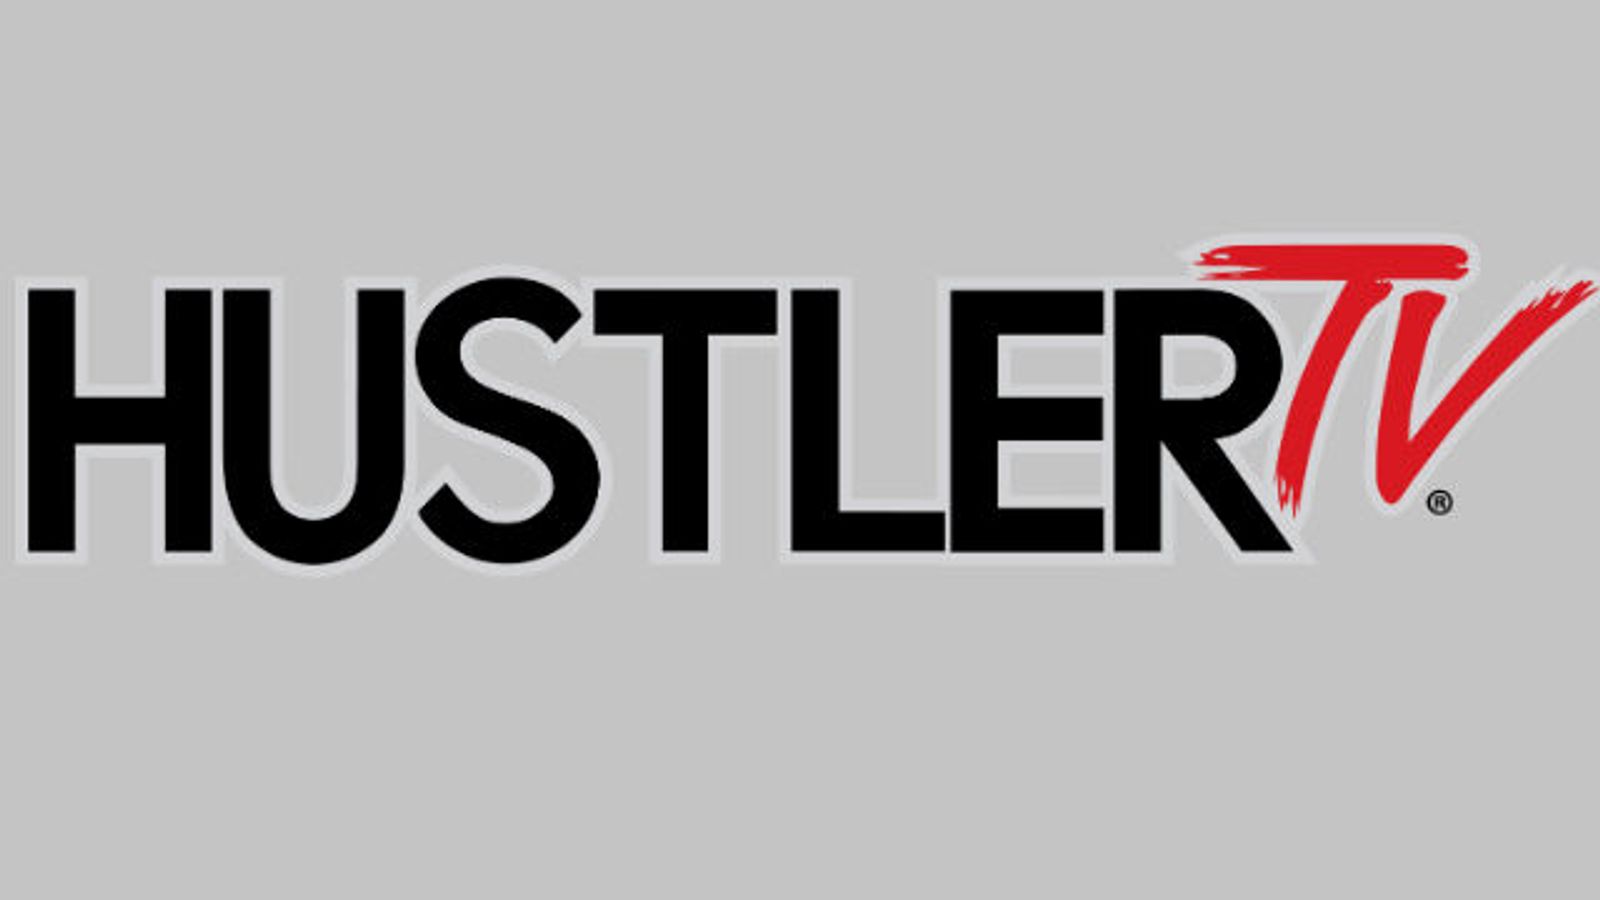 Hustler TV Celebrates 40th Anniversary with Special Package